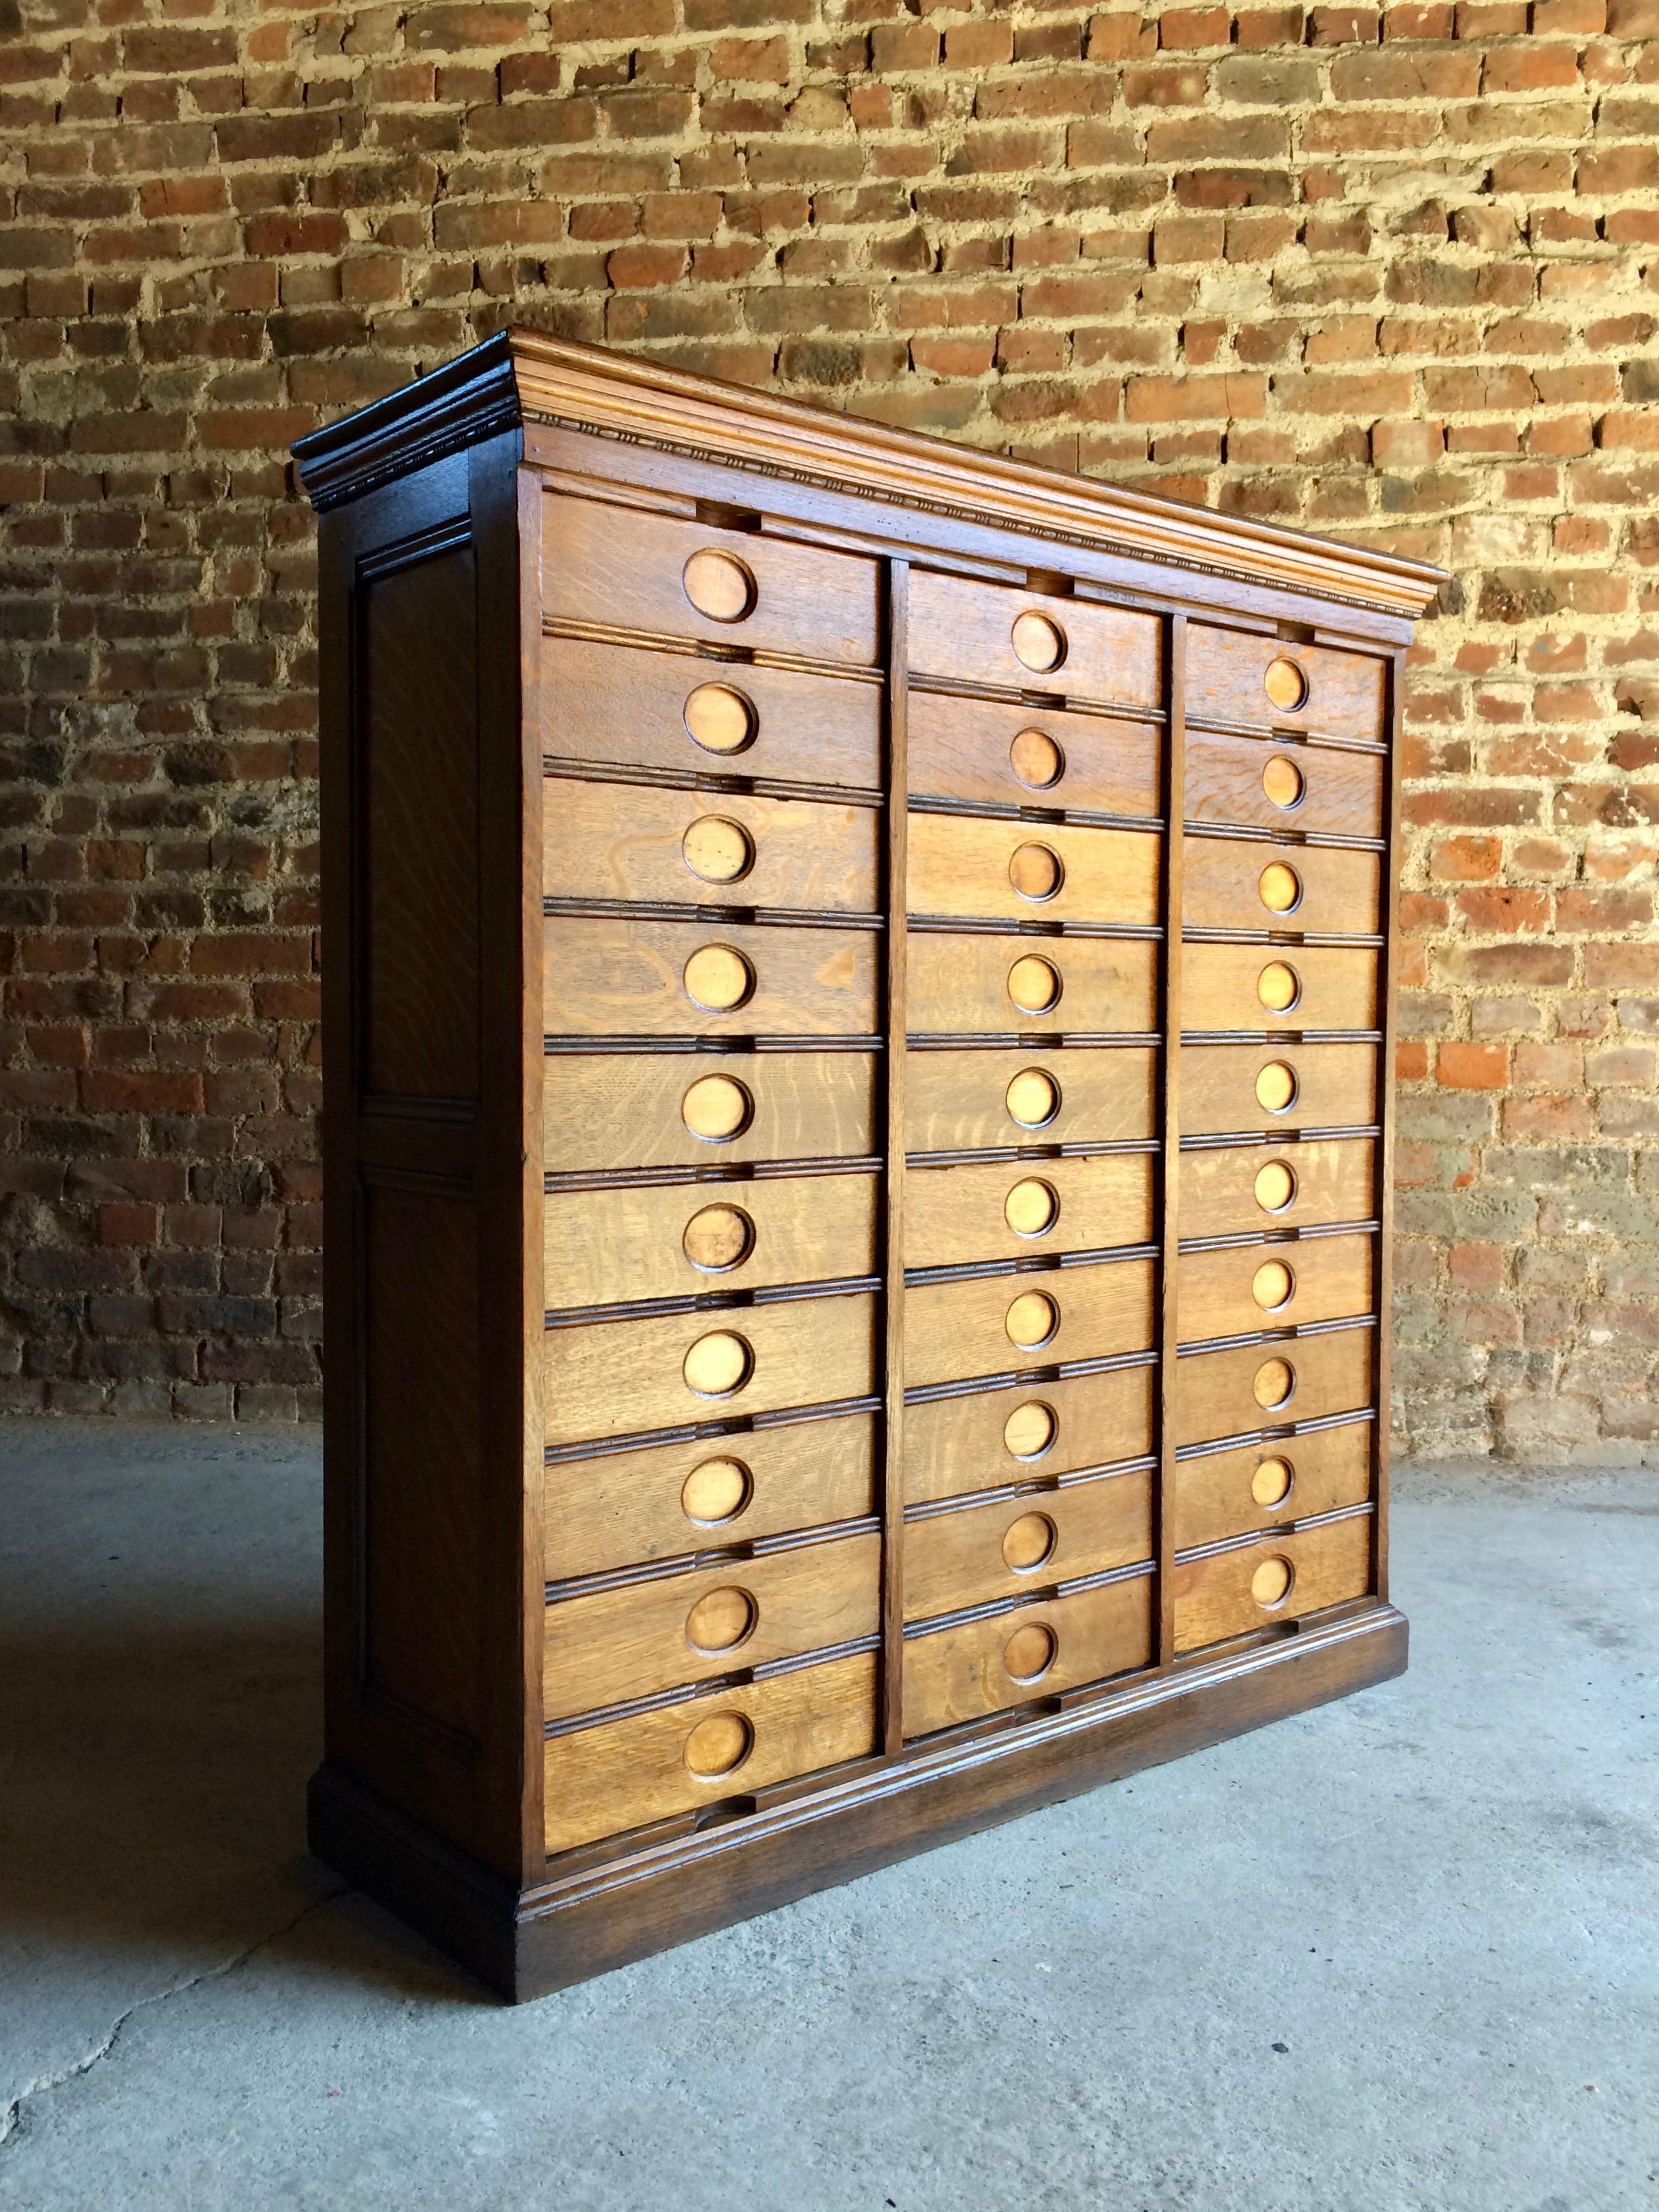 Amberg File & Index Co, 79-81 Duane Street, New York, Amberg’s imperial letter file cabinet, solid oak, thirty drawers and dates to 1st May 1909, she’s a beauty.

Amberg 
American
circa 1909.
Letter filing cabinet
Oak
Loft style
Bank of 30